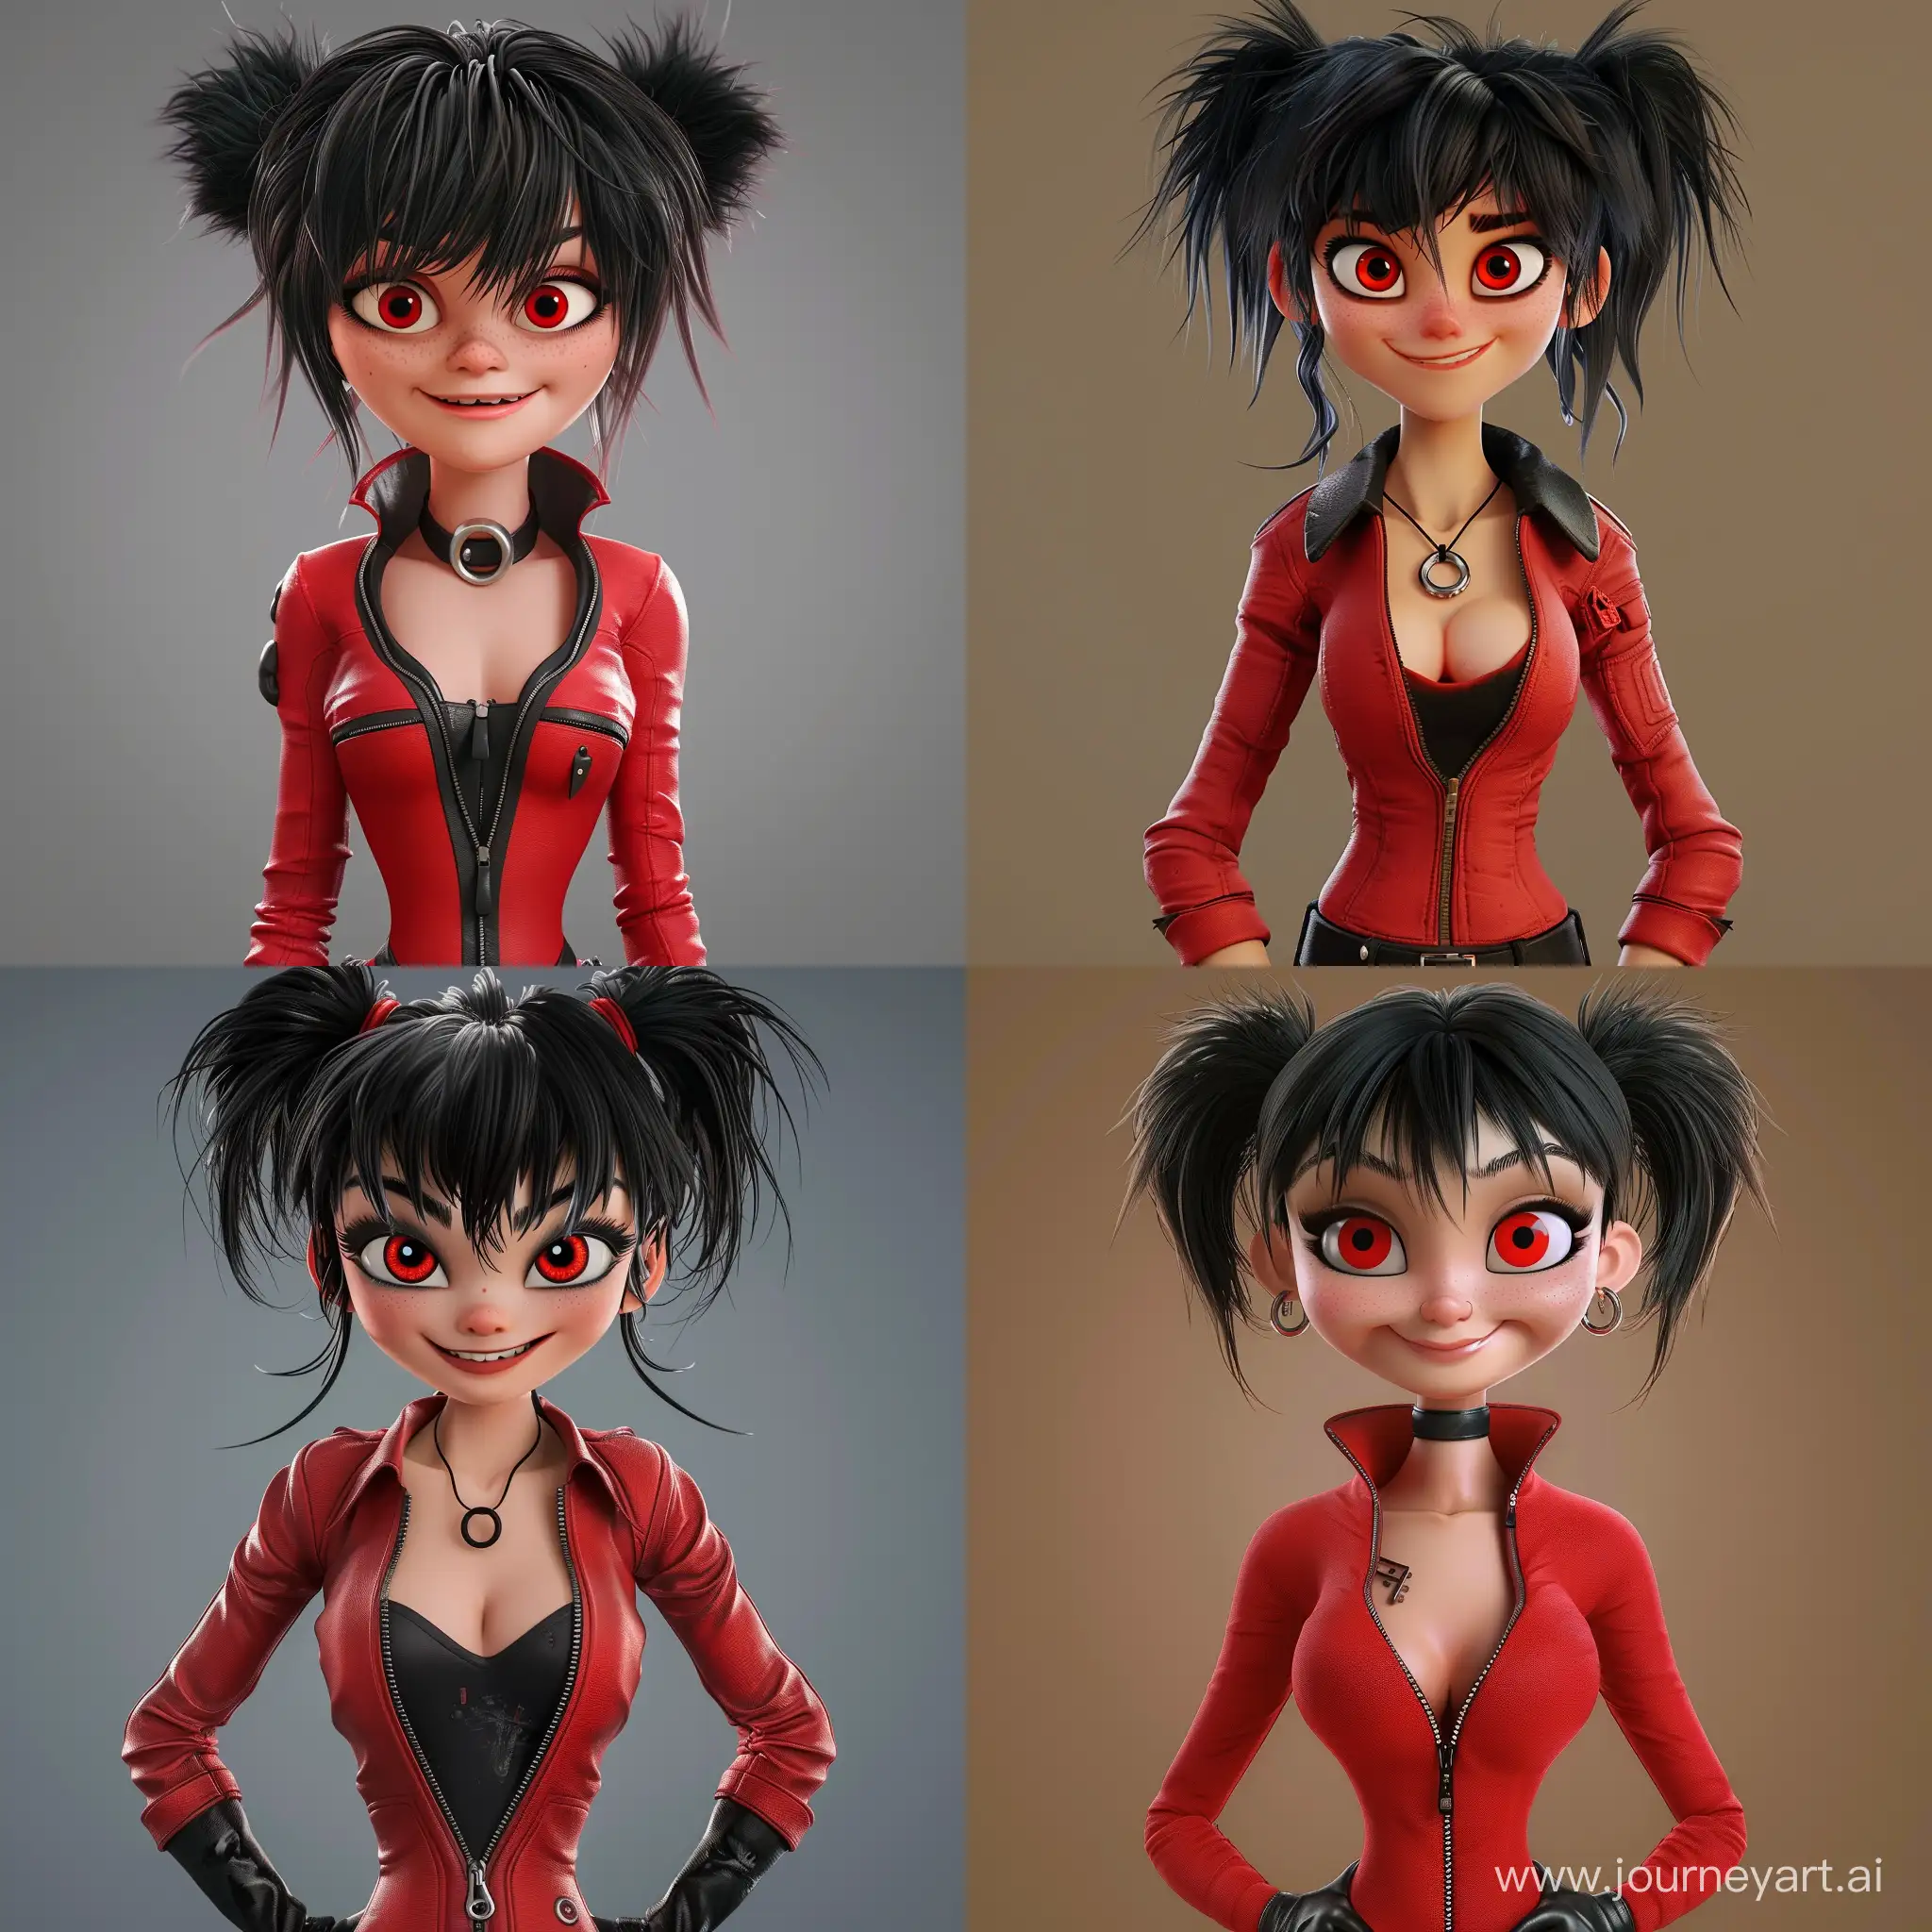 Cool-Girl-with-Red-Eyes-and-Black-Leather-Jacket-Smiling-in-Cartoon-Style